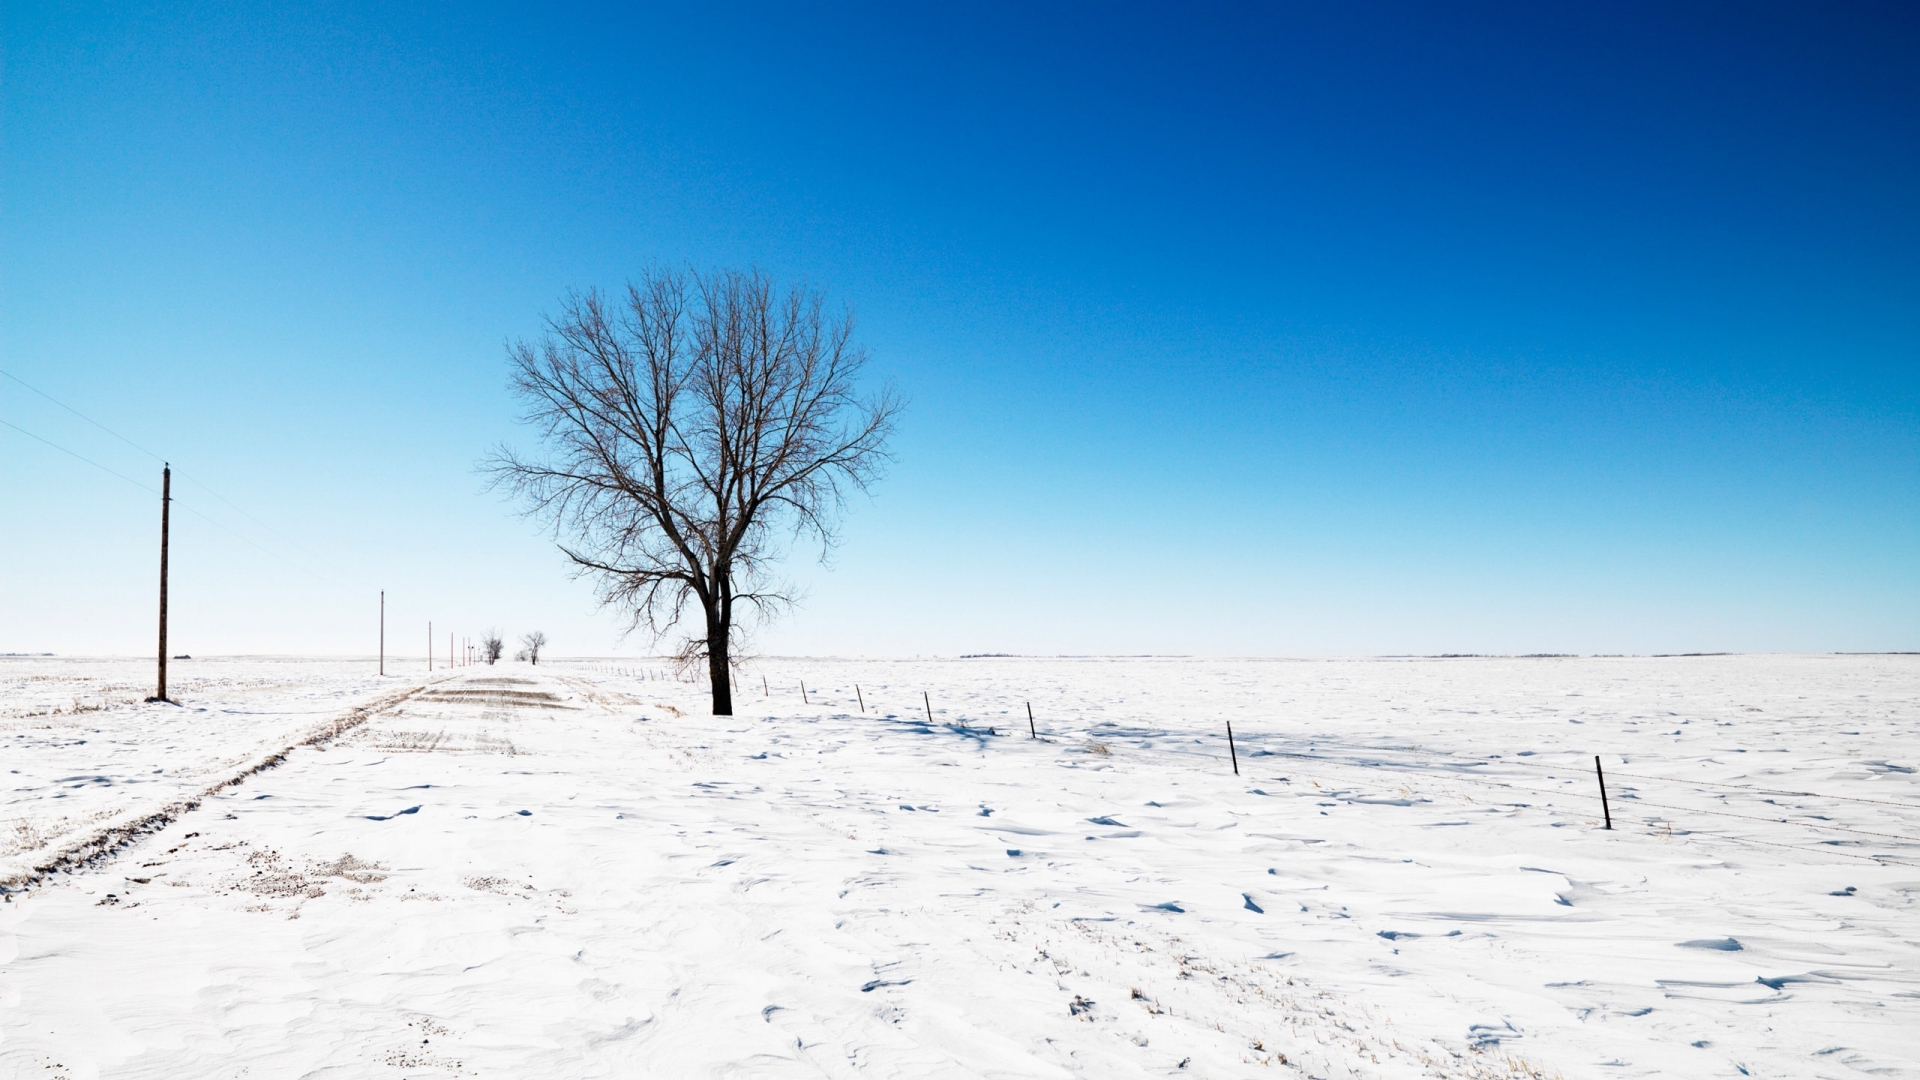 Lonely Tree on Winter for 1920 x 1080 HDTV 1080p resolution